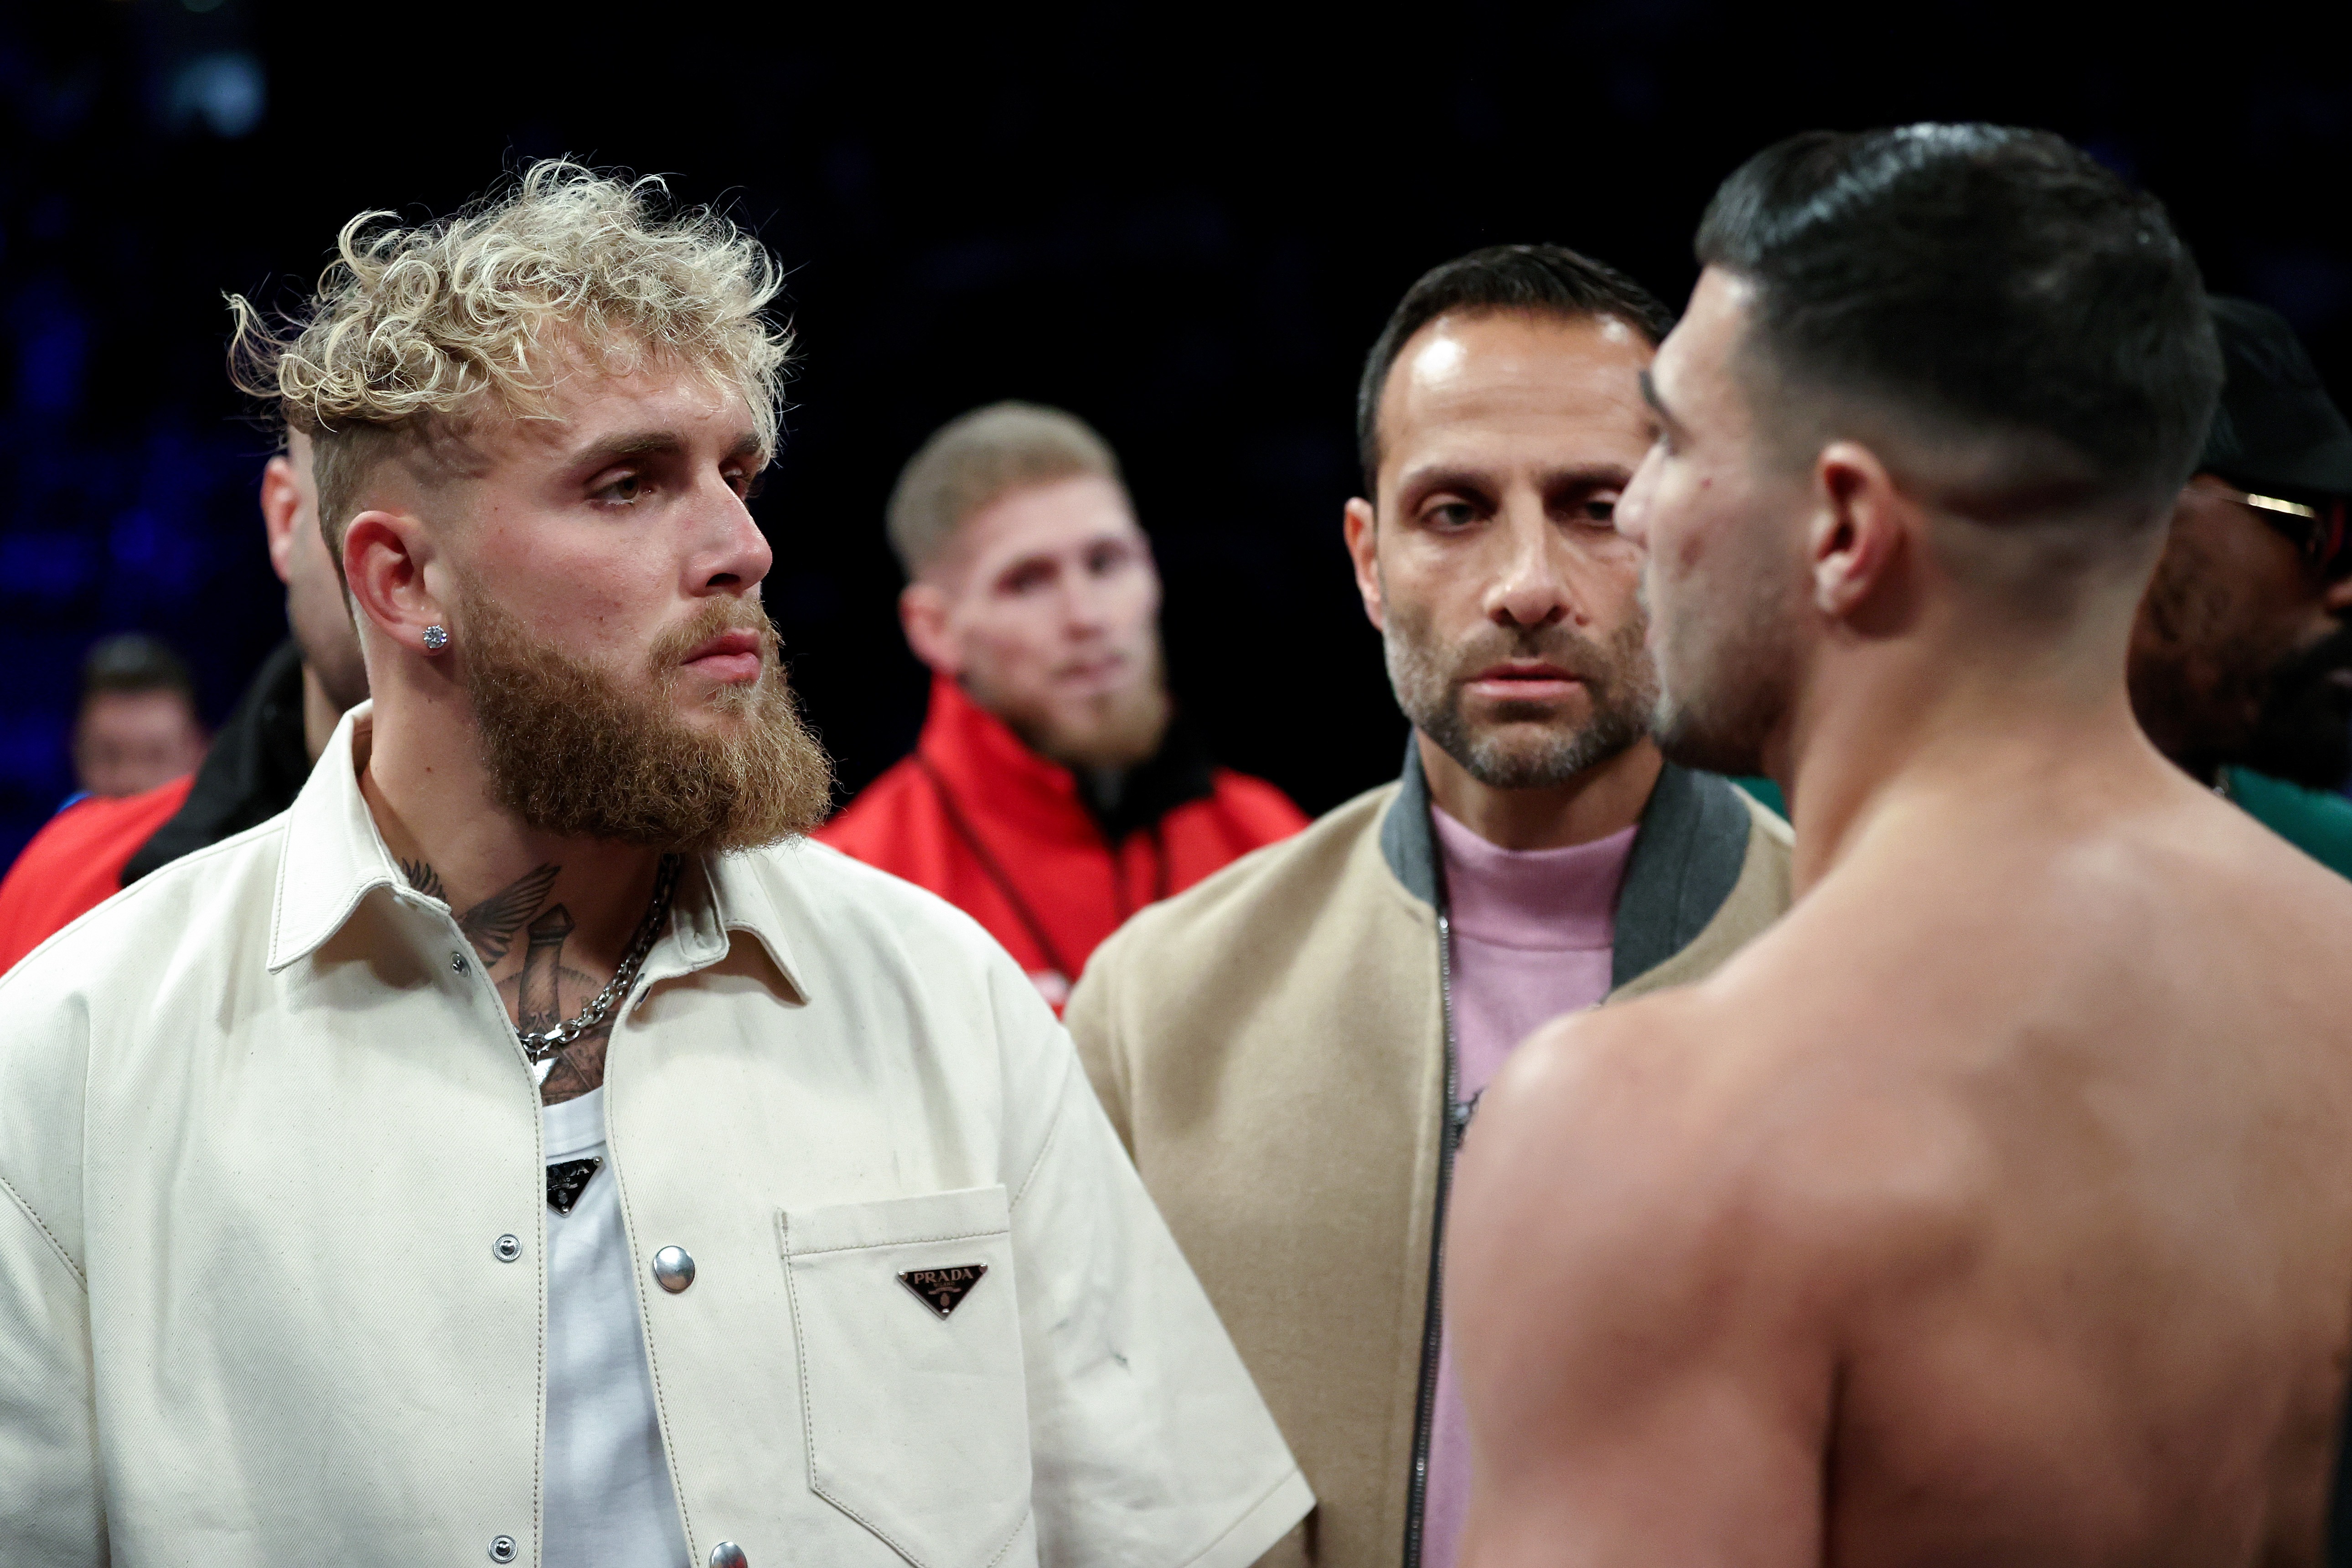 , Jake Paul vs Tommy Fury: Date, UK start time, live stream, TV channel and undercard for huge Saudi fight